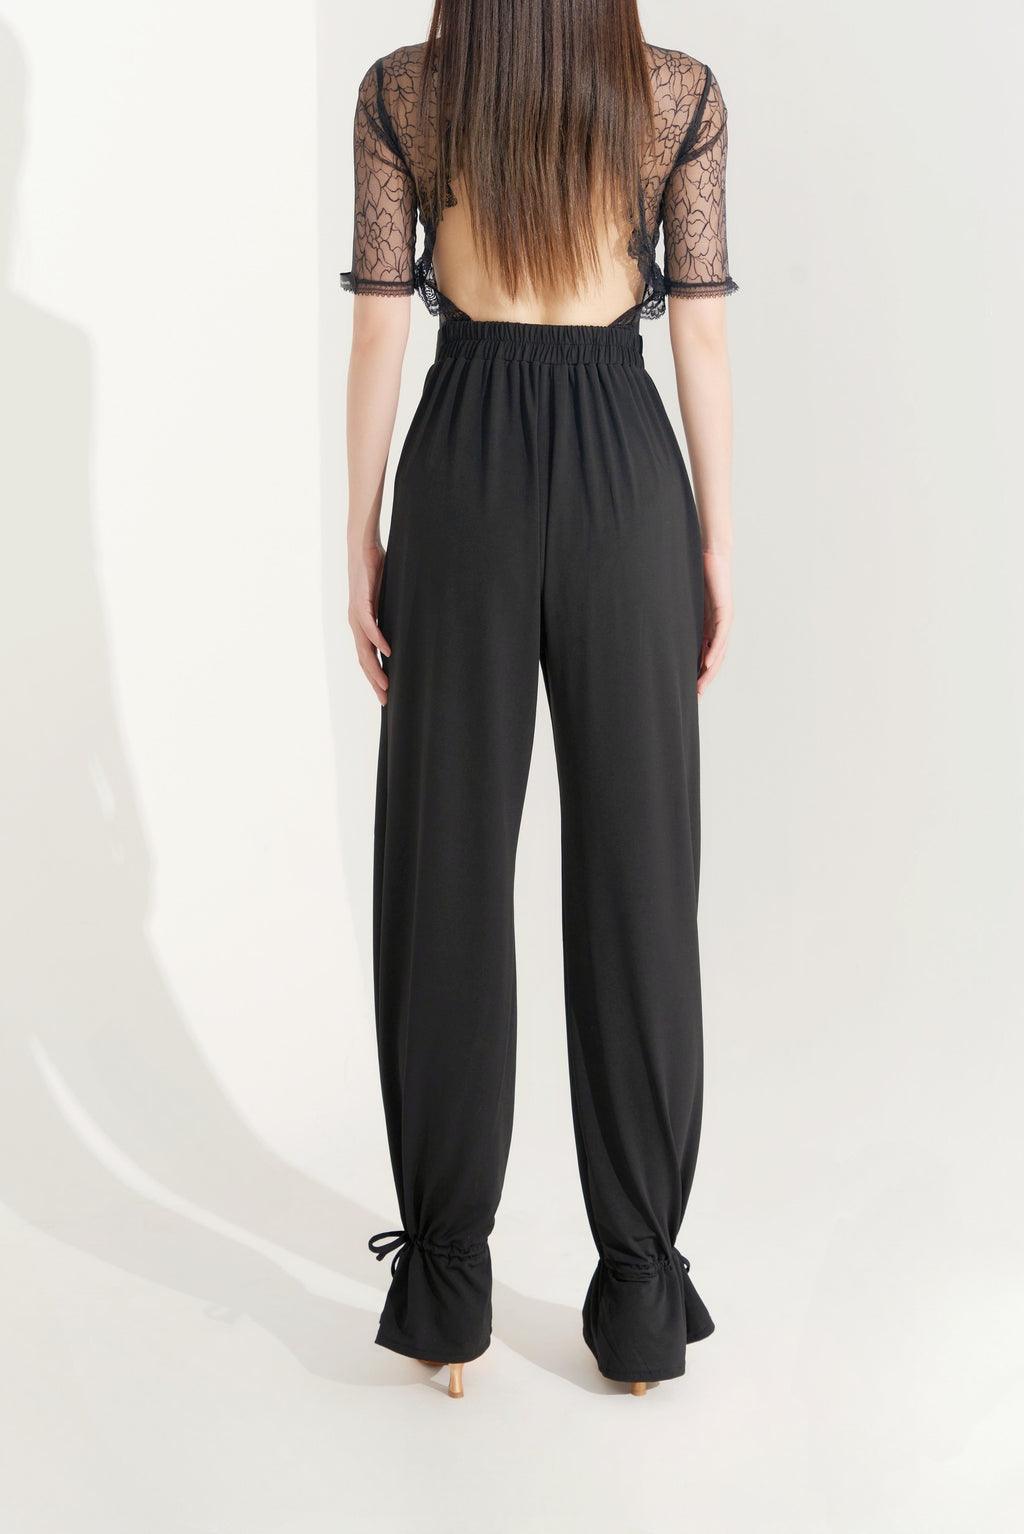 DQ-266  DANCE QUEEN Black Ankle Strap Trousers